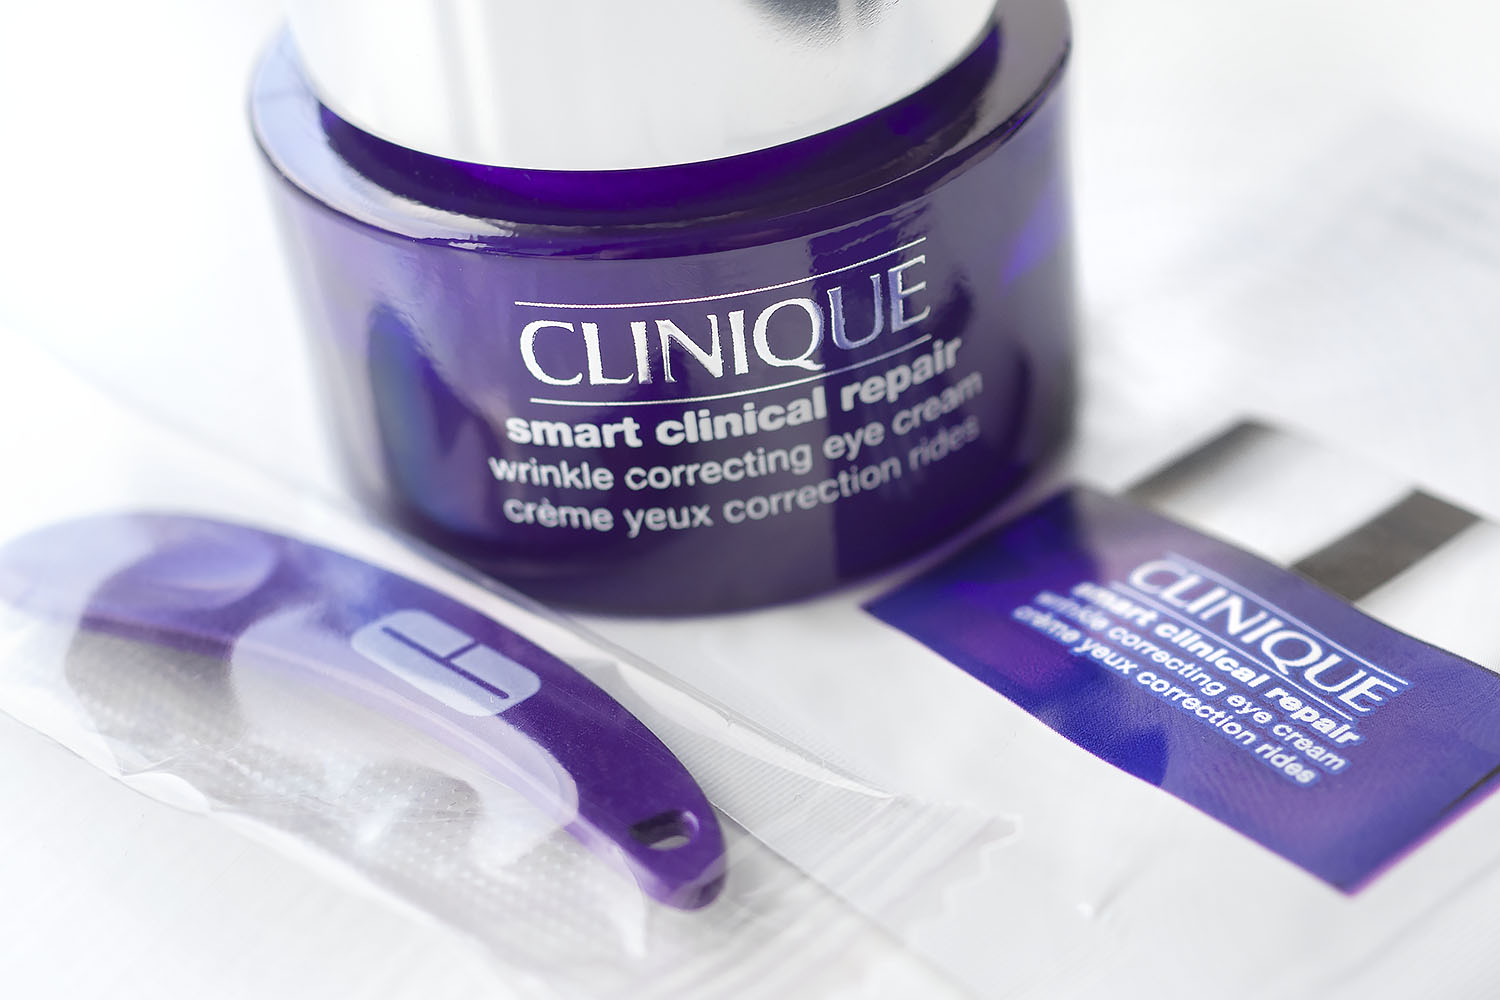 Clinique Smart Clinical Repair Wrinkle Correcting Eye Cream Open Pot Sample and Applicator